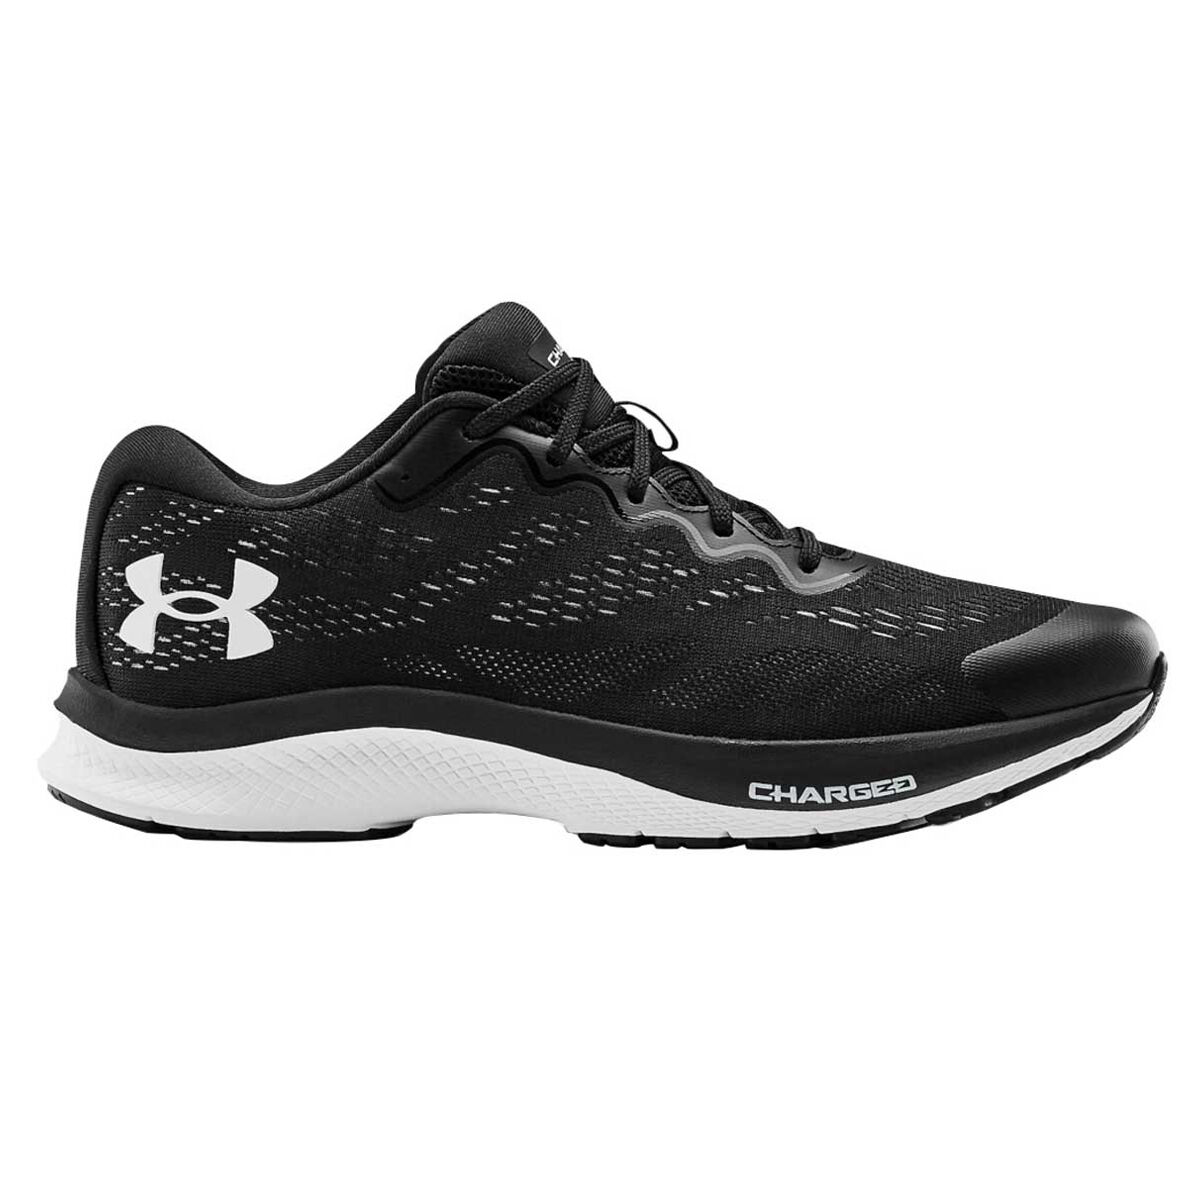 Under Armour Charged Bandit 6 Womens 